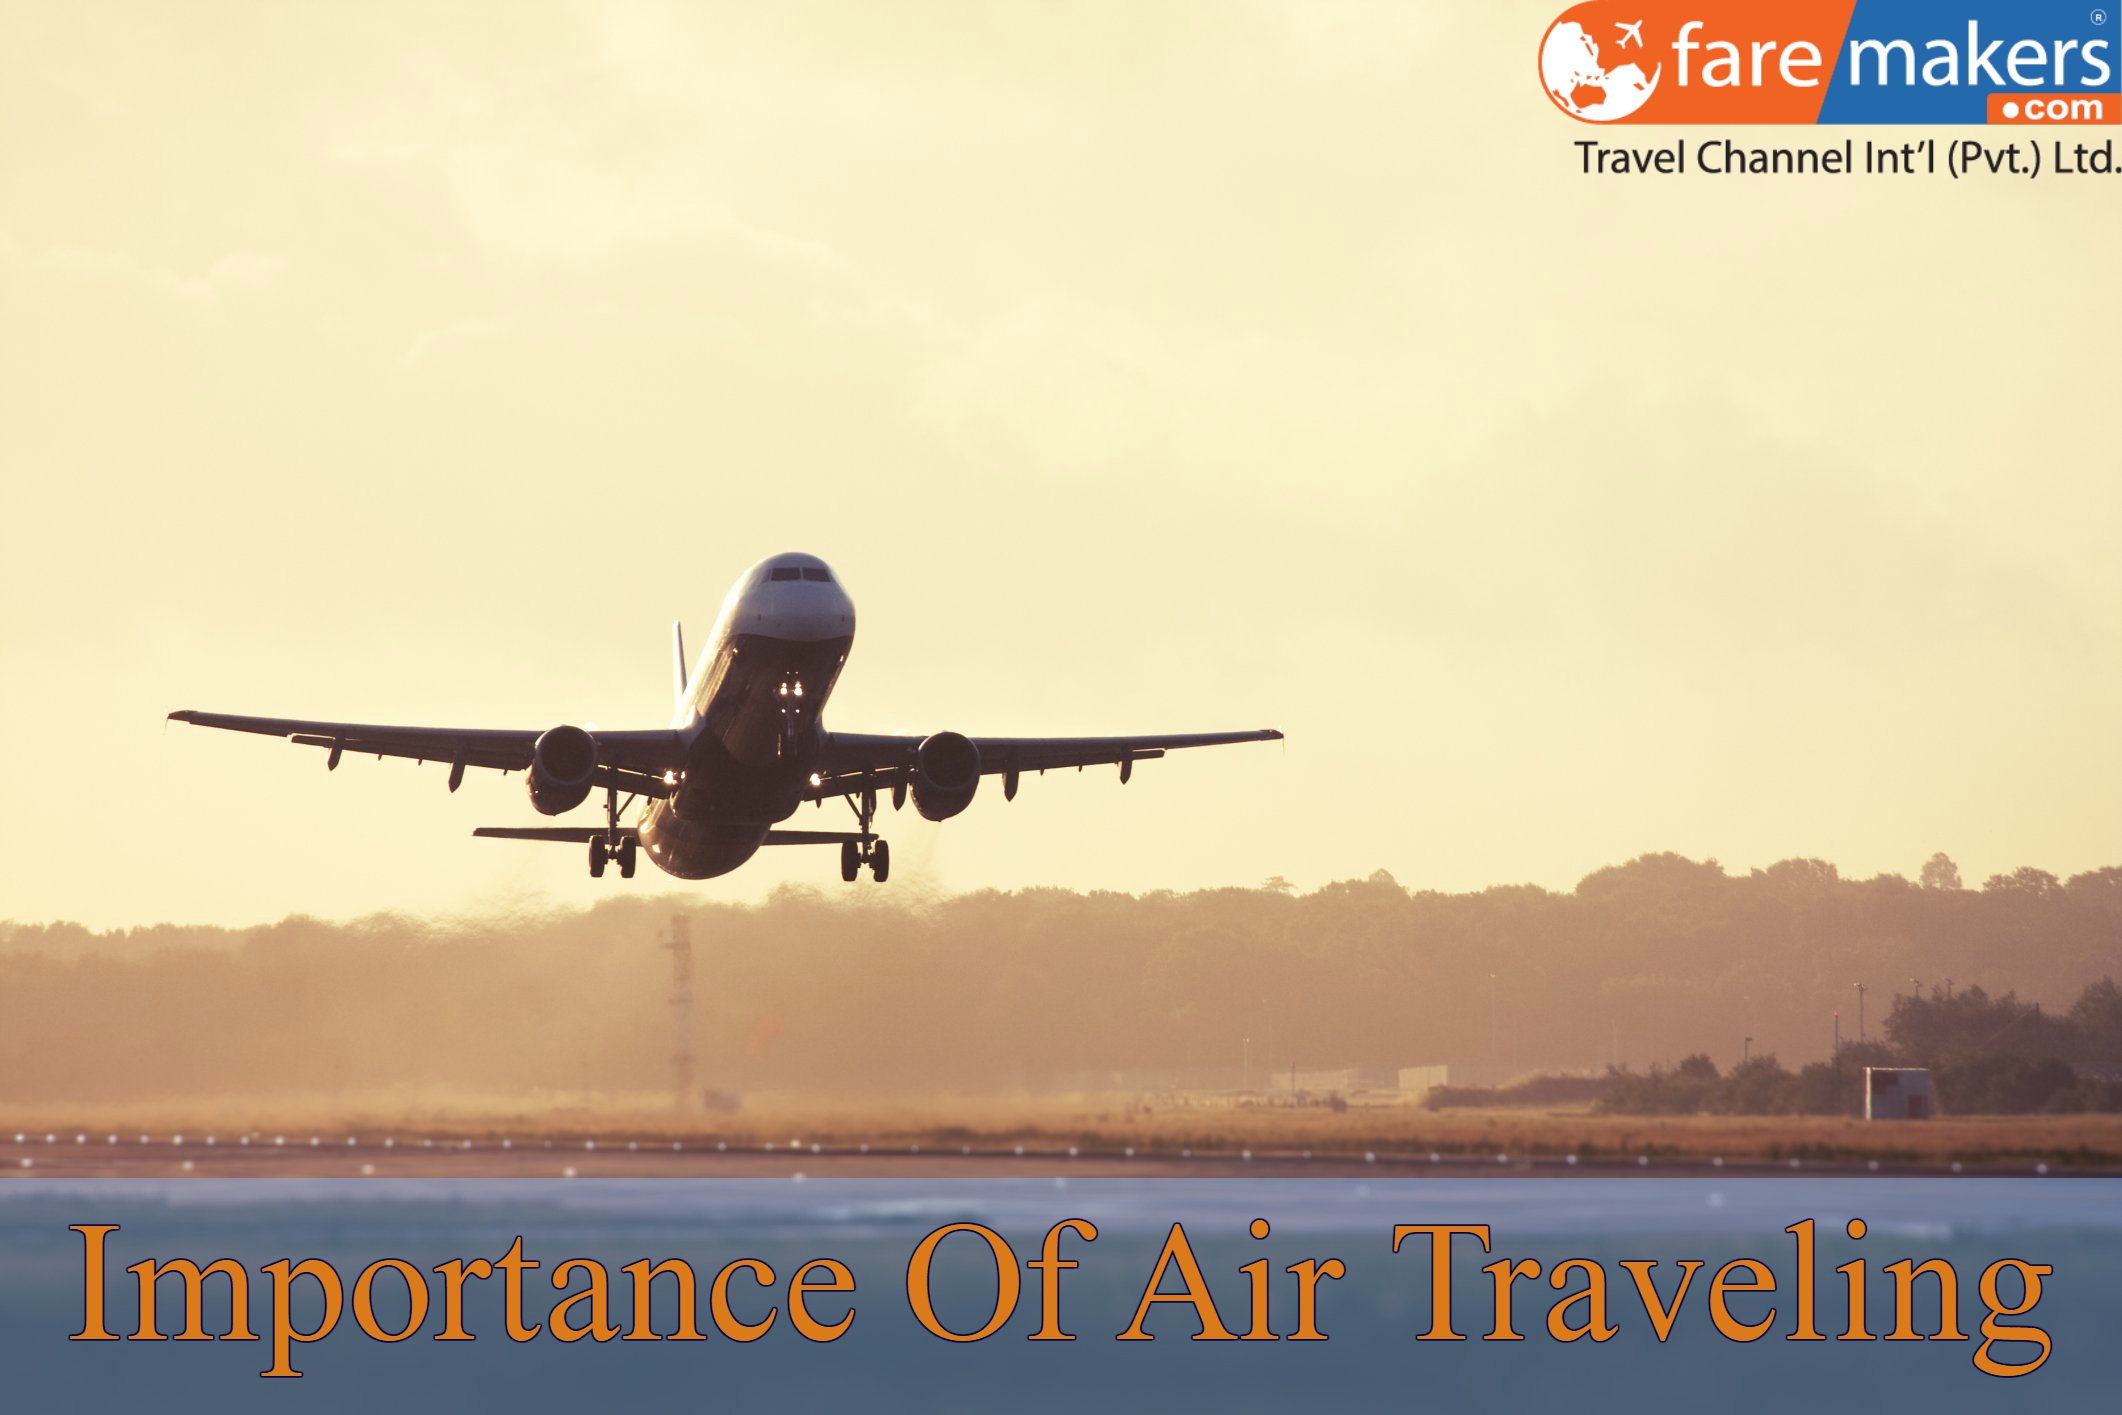 Recognize Importance of Air Traveling